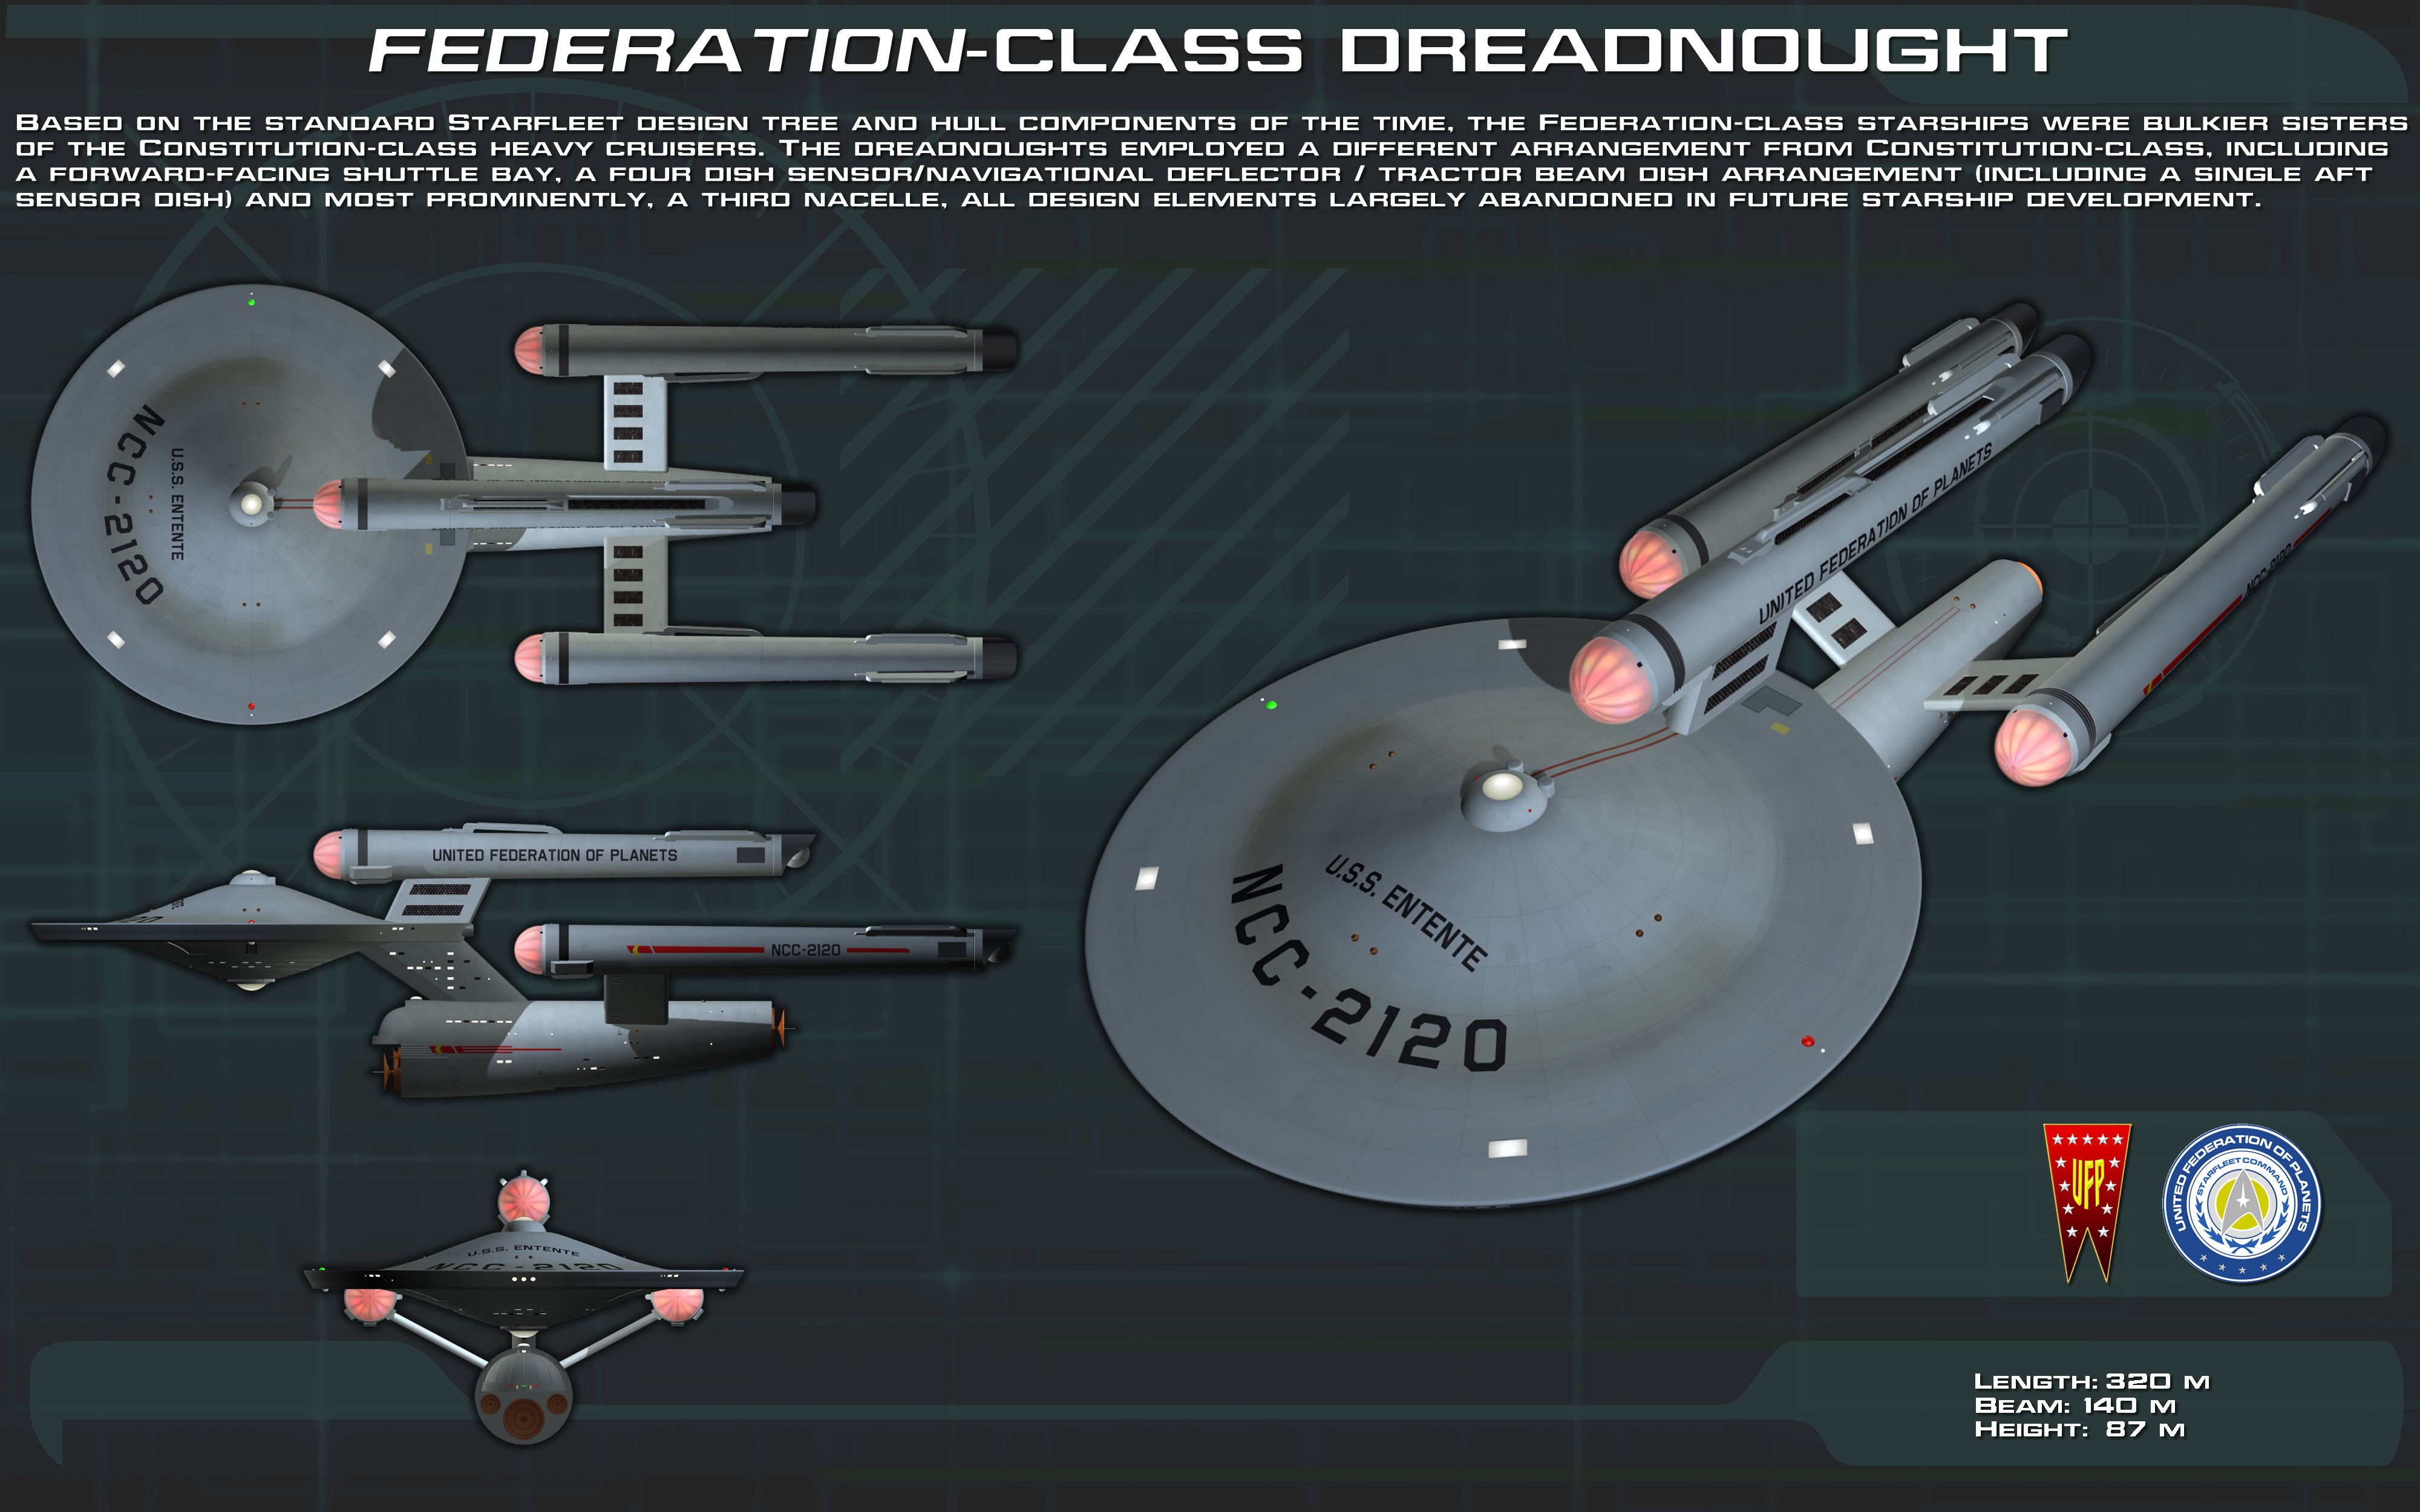 federation_class_ortho__new__by_unusualsuspex-d8hsoqx.jpg